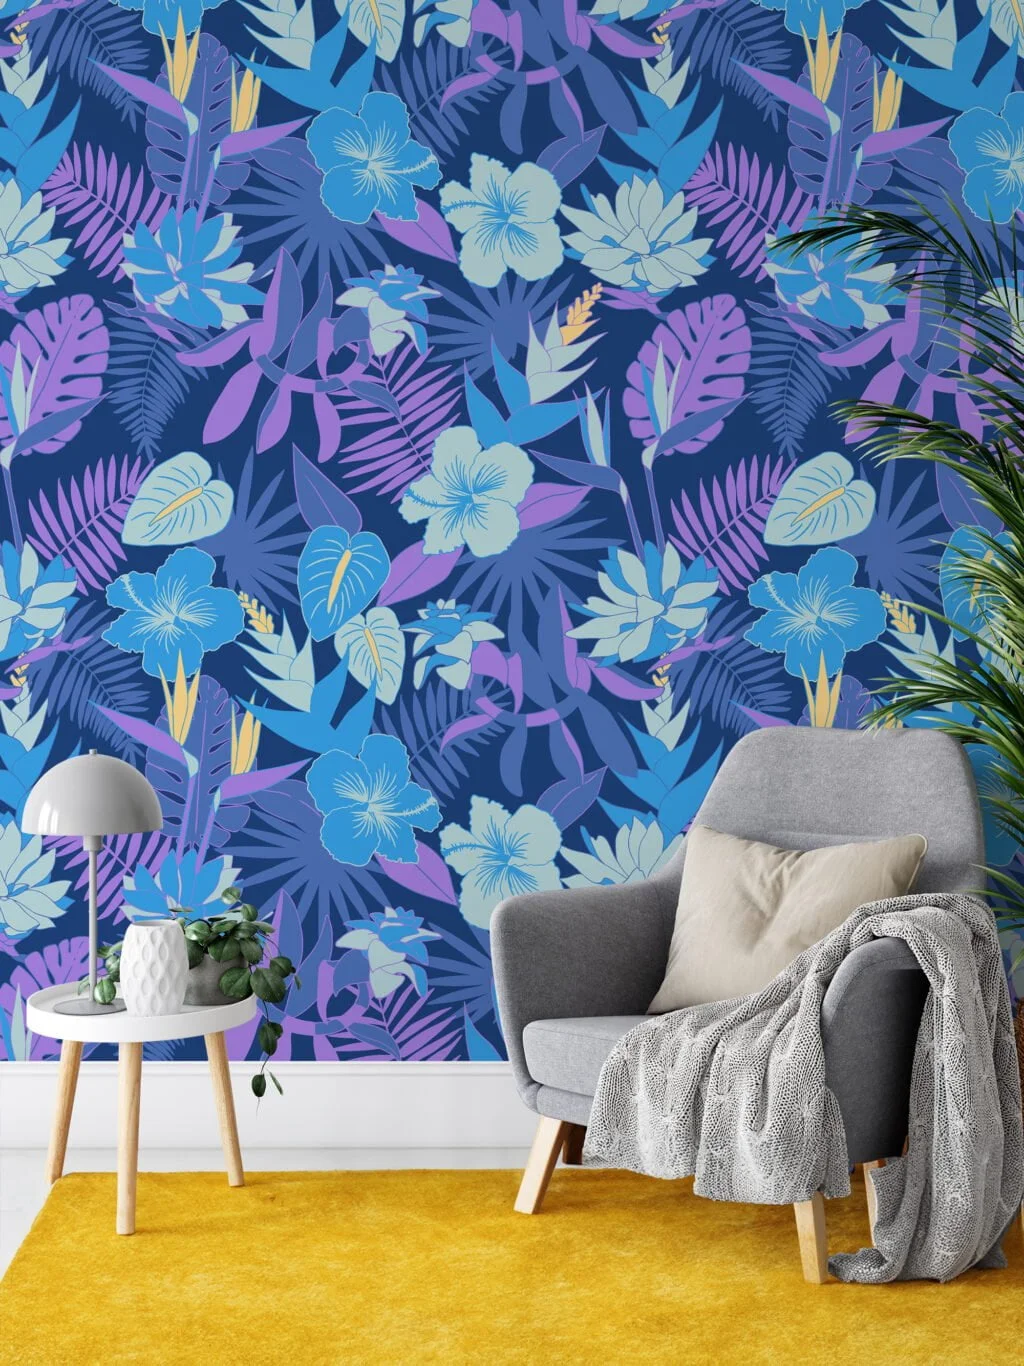 Blue And Purple Hued Floral Illustration Wallpaper, Vibrant Tropical Night Floral Peel & Stick Wall Mural